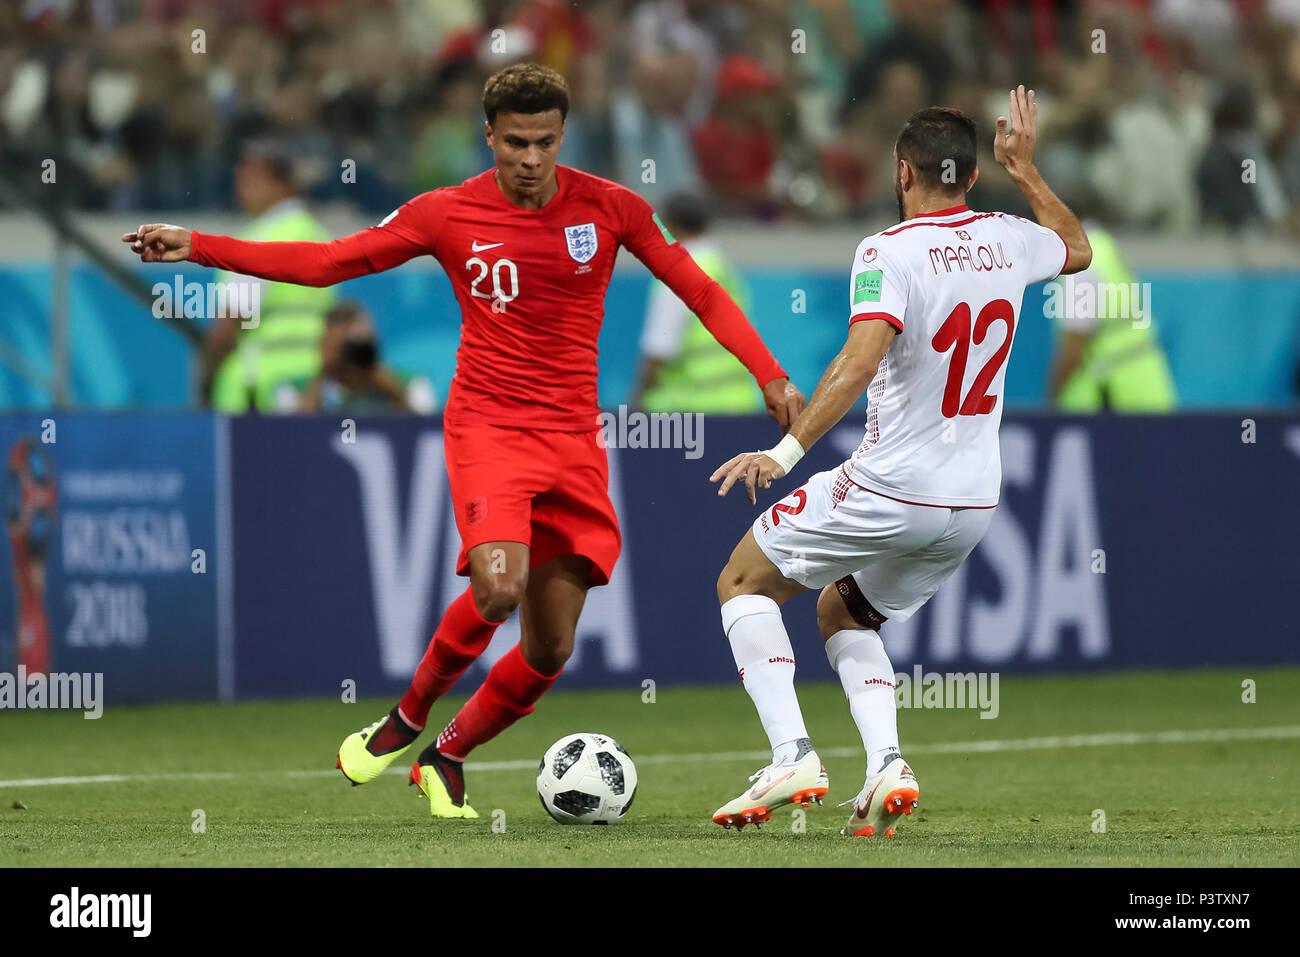 Volgograd, Russia. 18th Jun, 2018. Dele Alli of England and Ali Maaloul of Tunisia during the 2018 FIFA World Cup Group G match between Tunisia and England at Volgograd Arena on June 18th 2018 in Volgograd, Russia. (Photo by Daniel Chesterton/phcimages.com) Credit: PHC Images/Alamy Live News Stock Photo